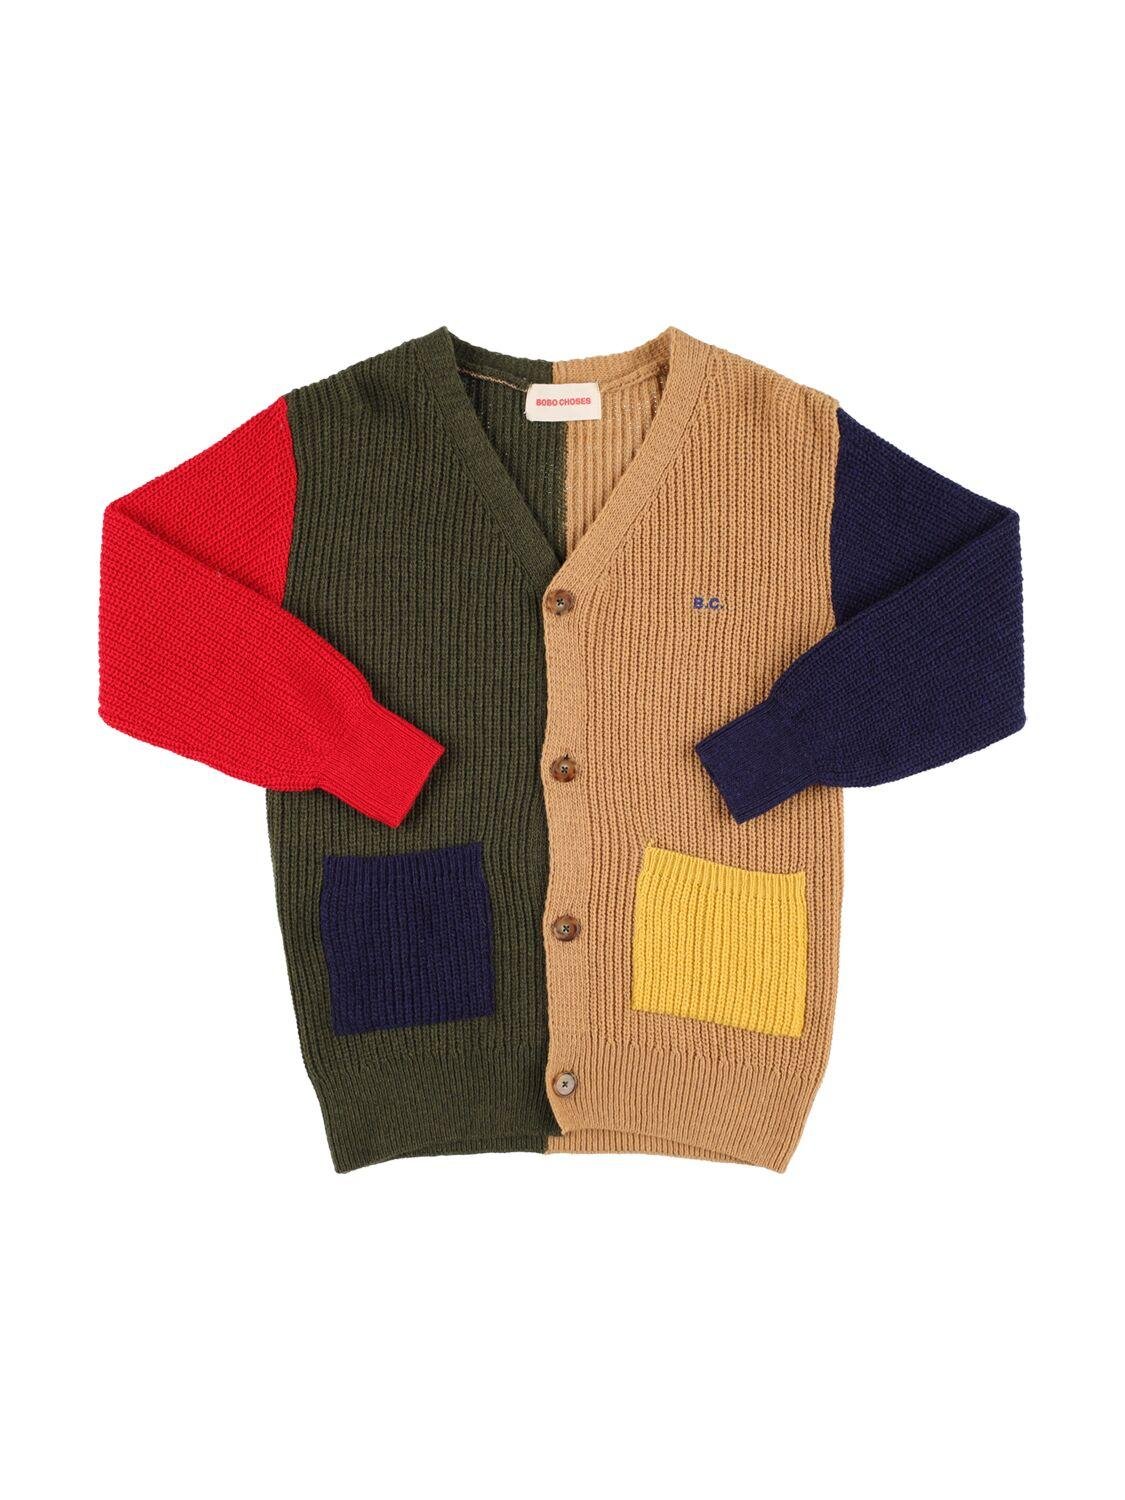 Color Block Wool Blend Knit Cardigan by BOBO CHOSES